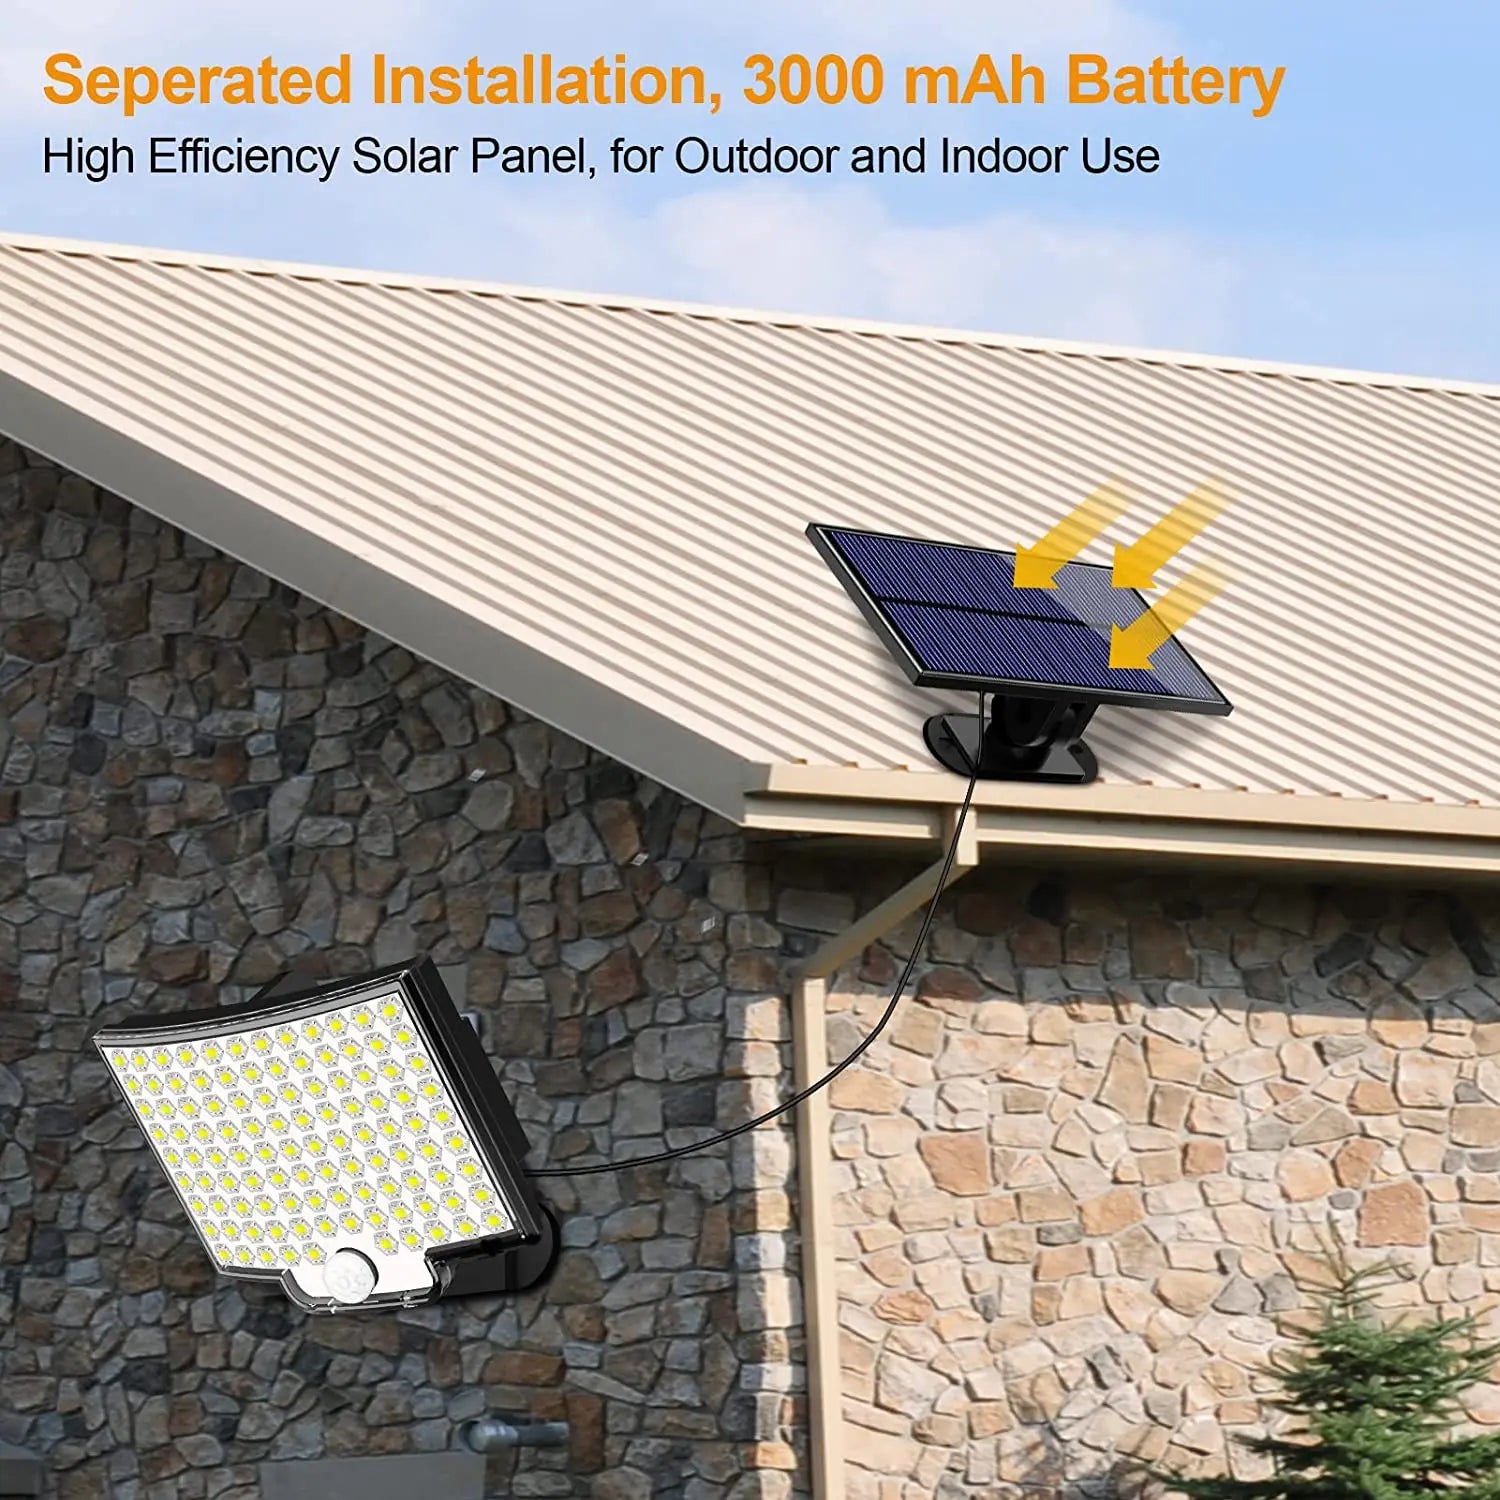 Solar Light, Compact, eco-friendly lighting solution with easy installation and long-lasting power.